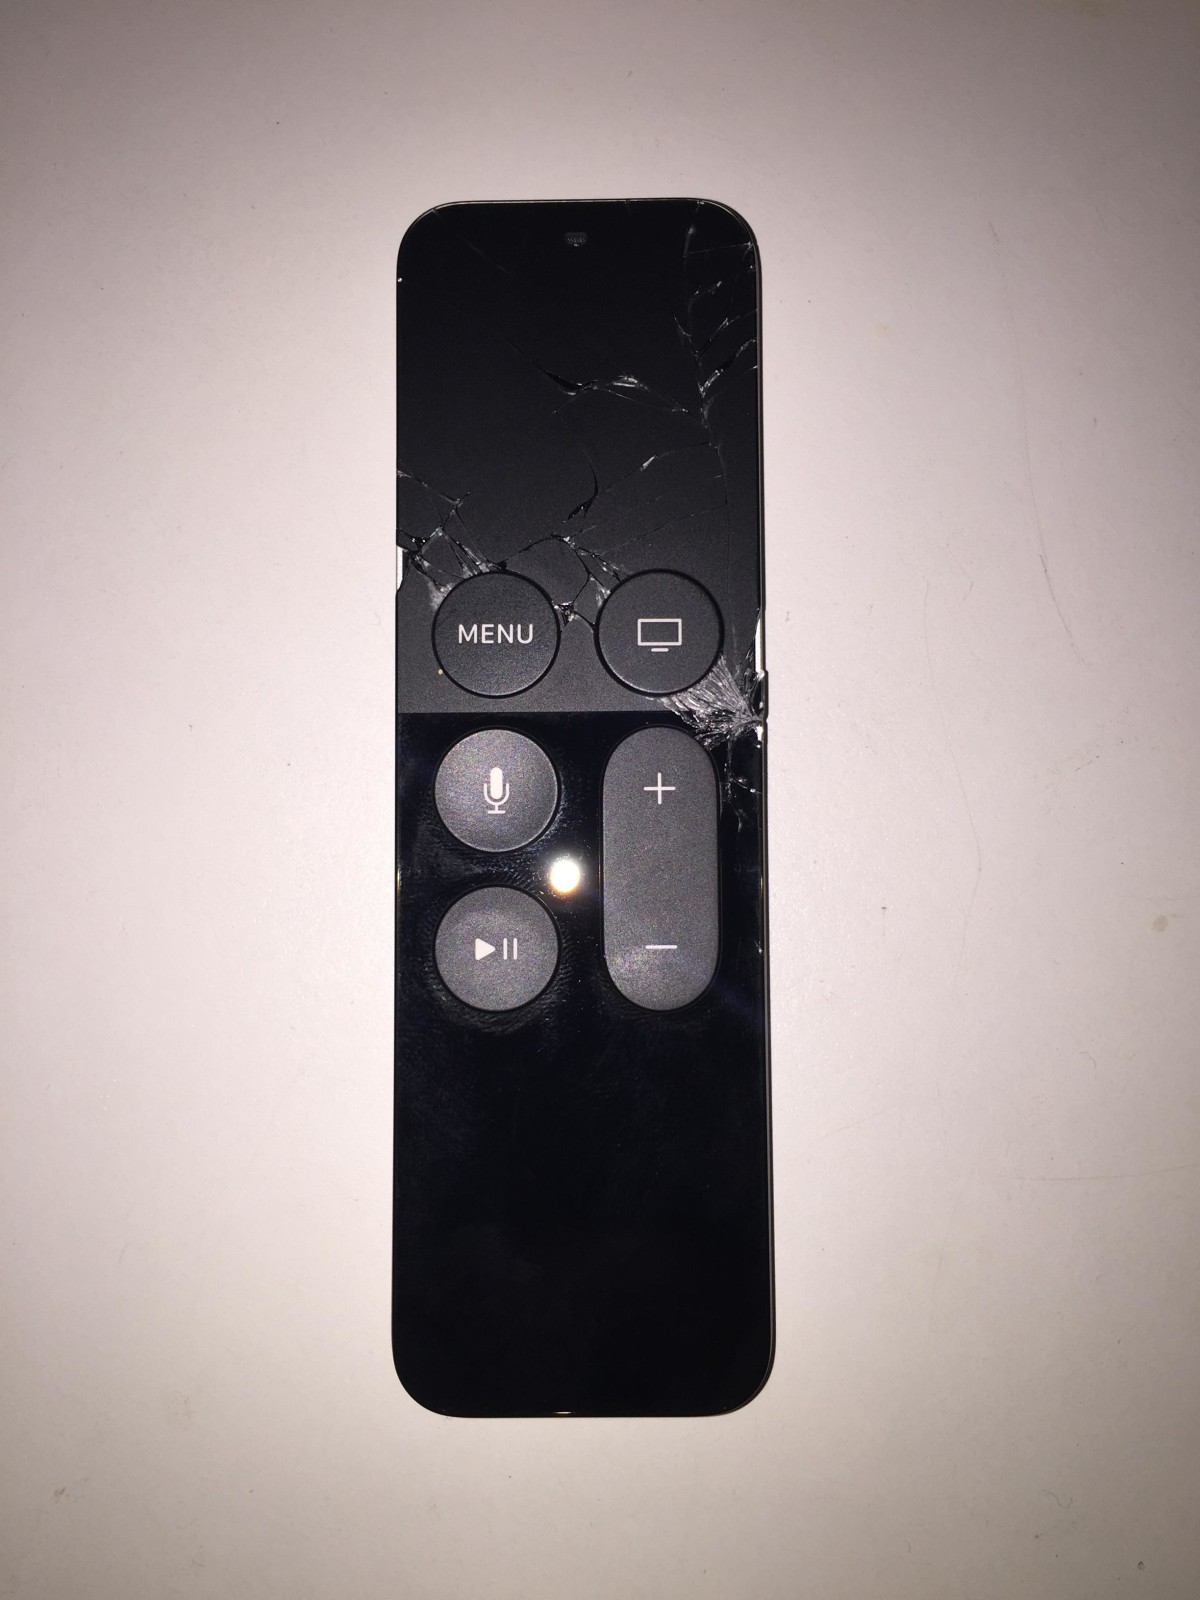 The new Apple TV remote shattered